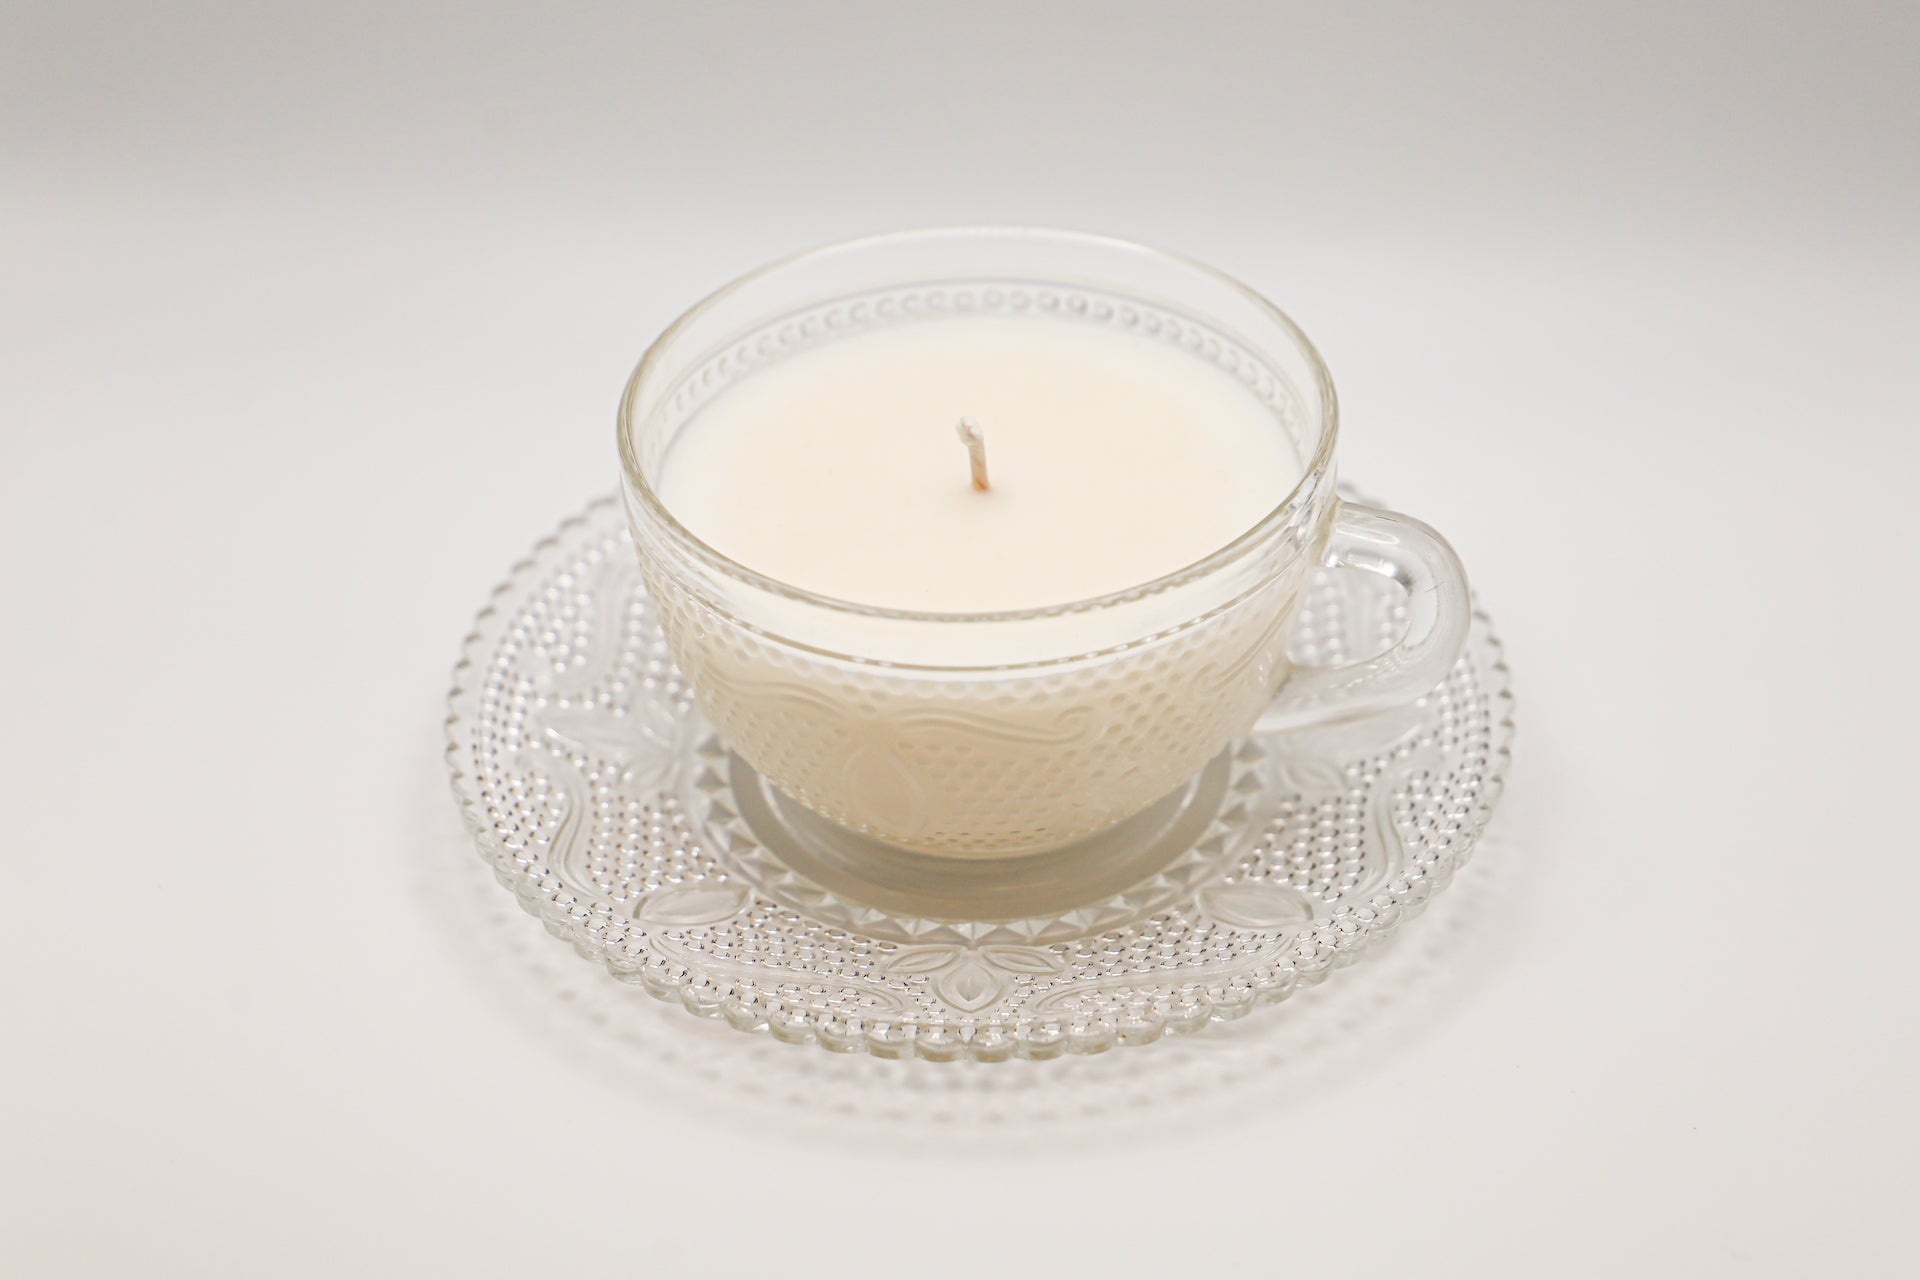 Federal Glass Heritage pattern cup and saucer with soy candle in multiple scents